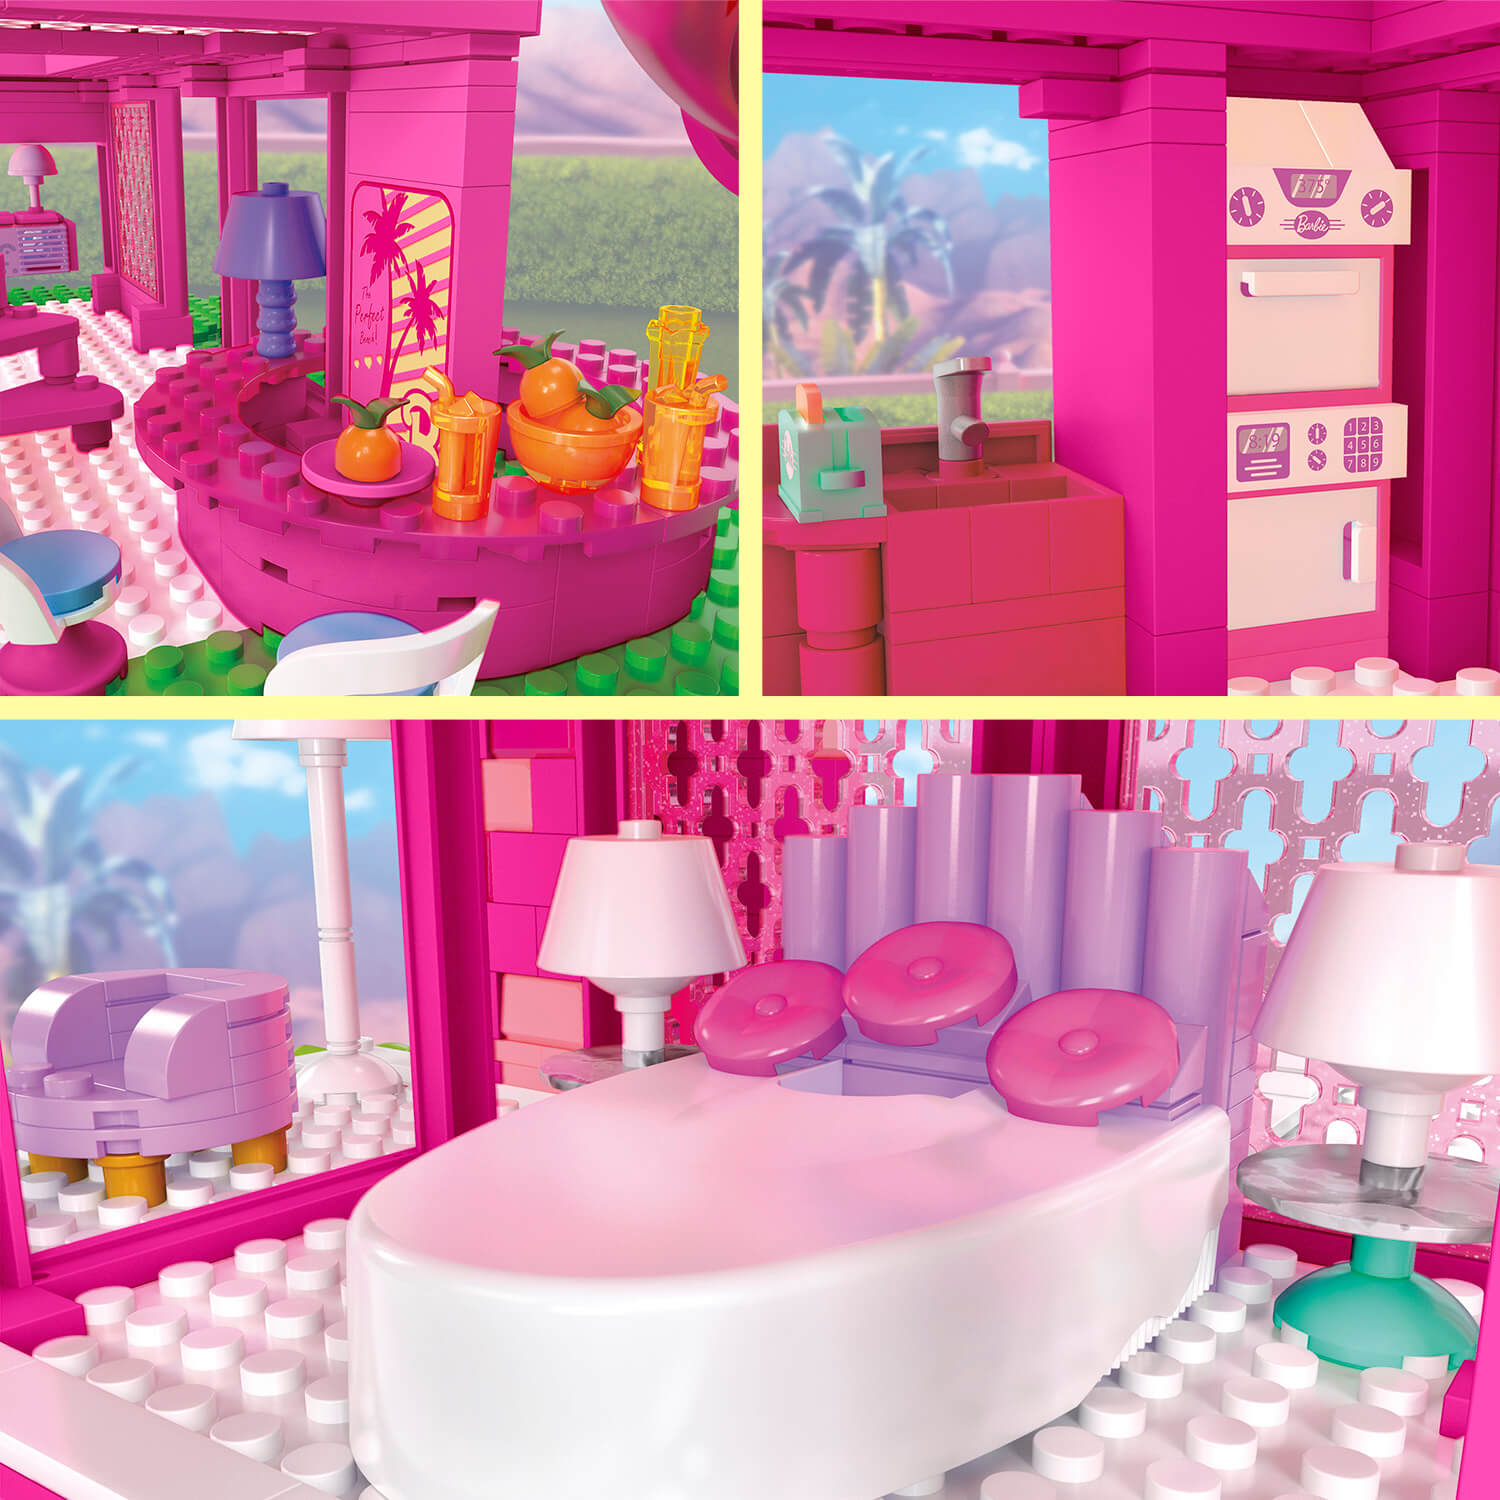 MEGA Barbie Dreamhouse featuers shows the different living areas and accessories.